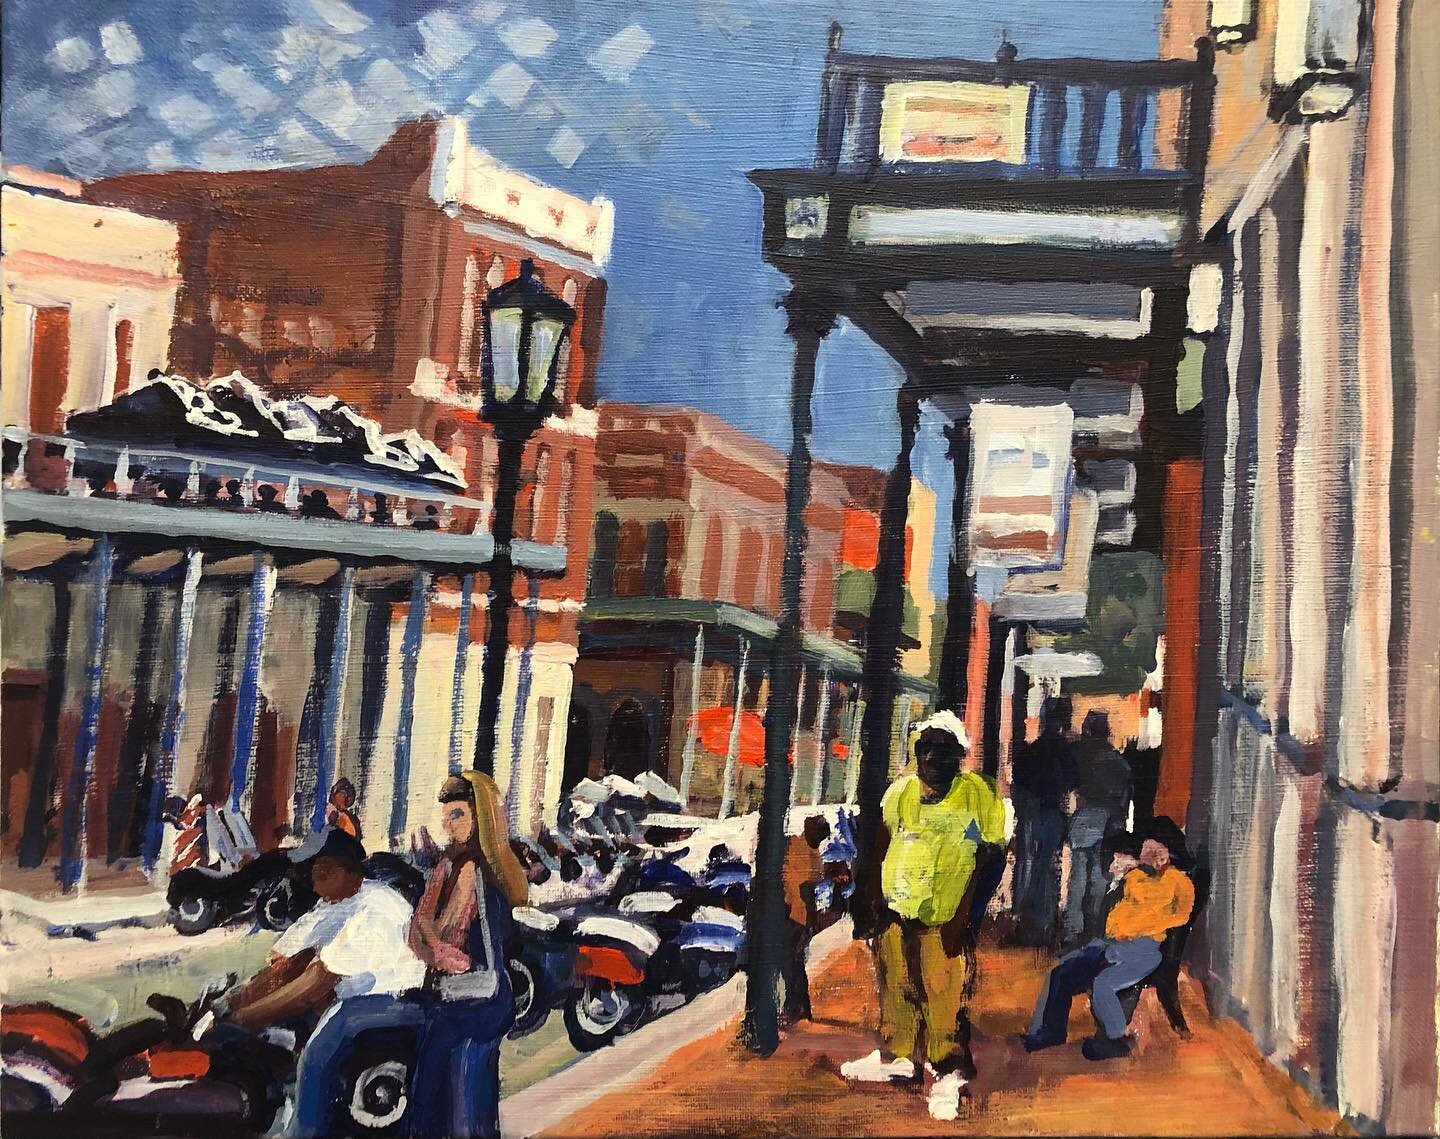 Honored to receive a 🥇 first place for my entr&eacute;e &ldquo; Biker Rally Weekend on The Strand&rdquo; reception and sale tomorrow 3-5 at GLee Gallery on the Strand. Hope to see you there. #galvestonconventioncenter #gleegallary #houstonartists #g